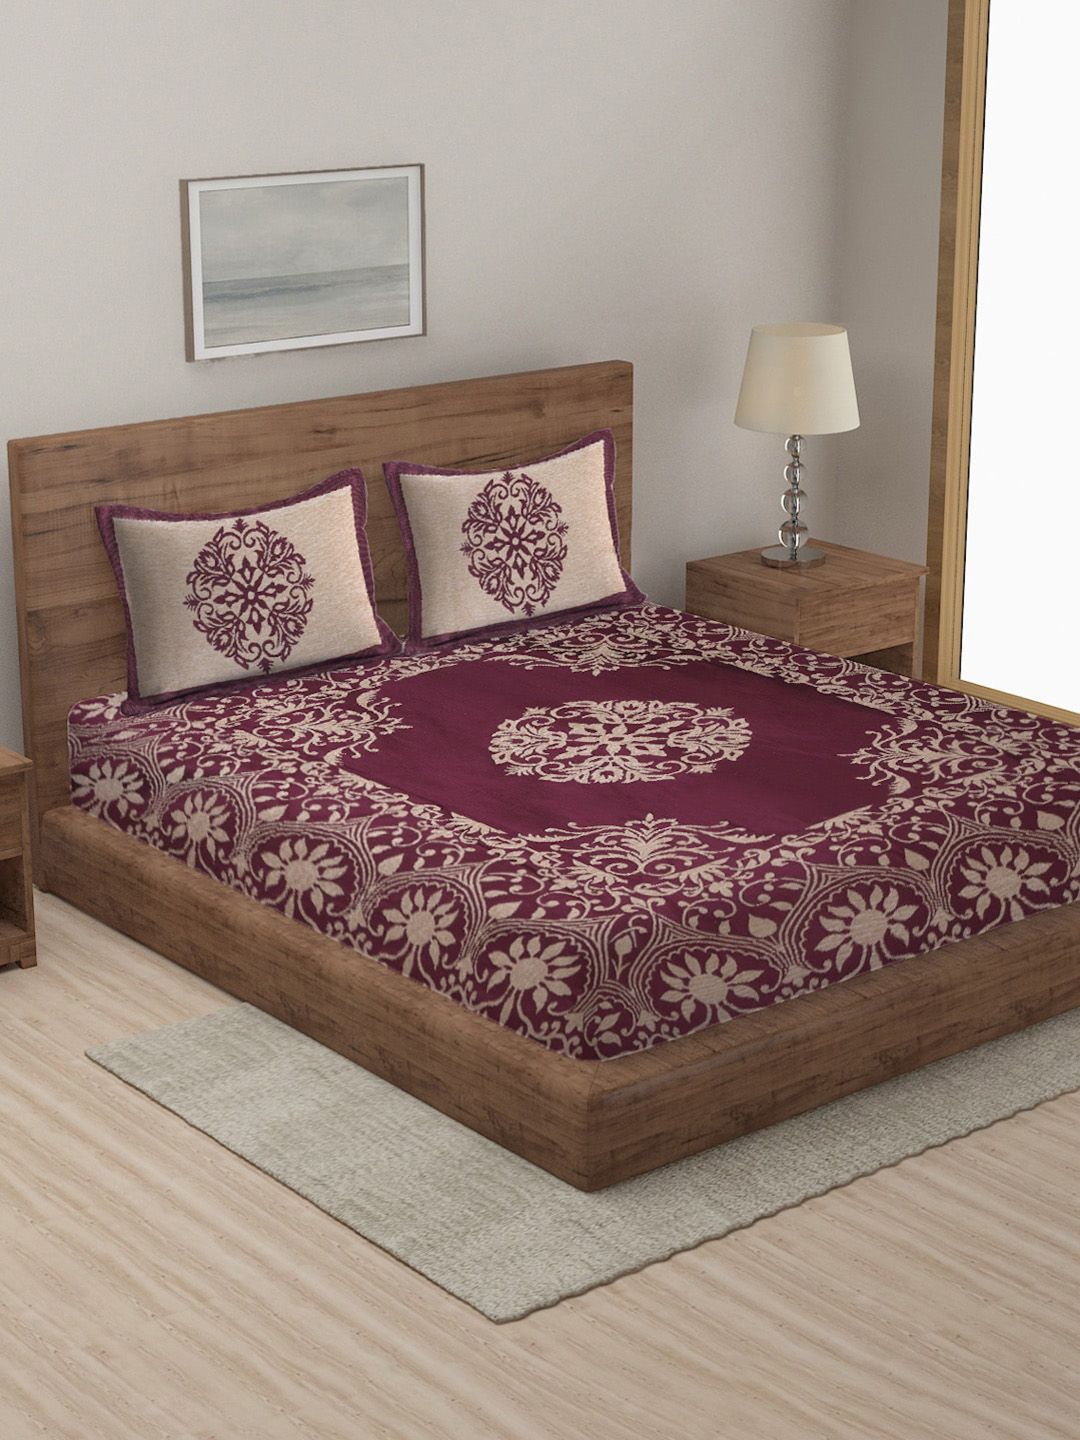 MULTITEX Maroon Floral Printed Cotton Bed Cover Price in India